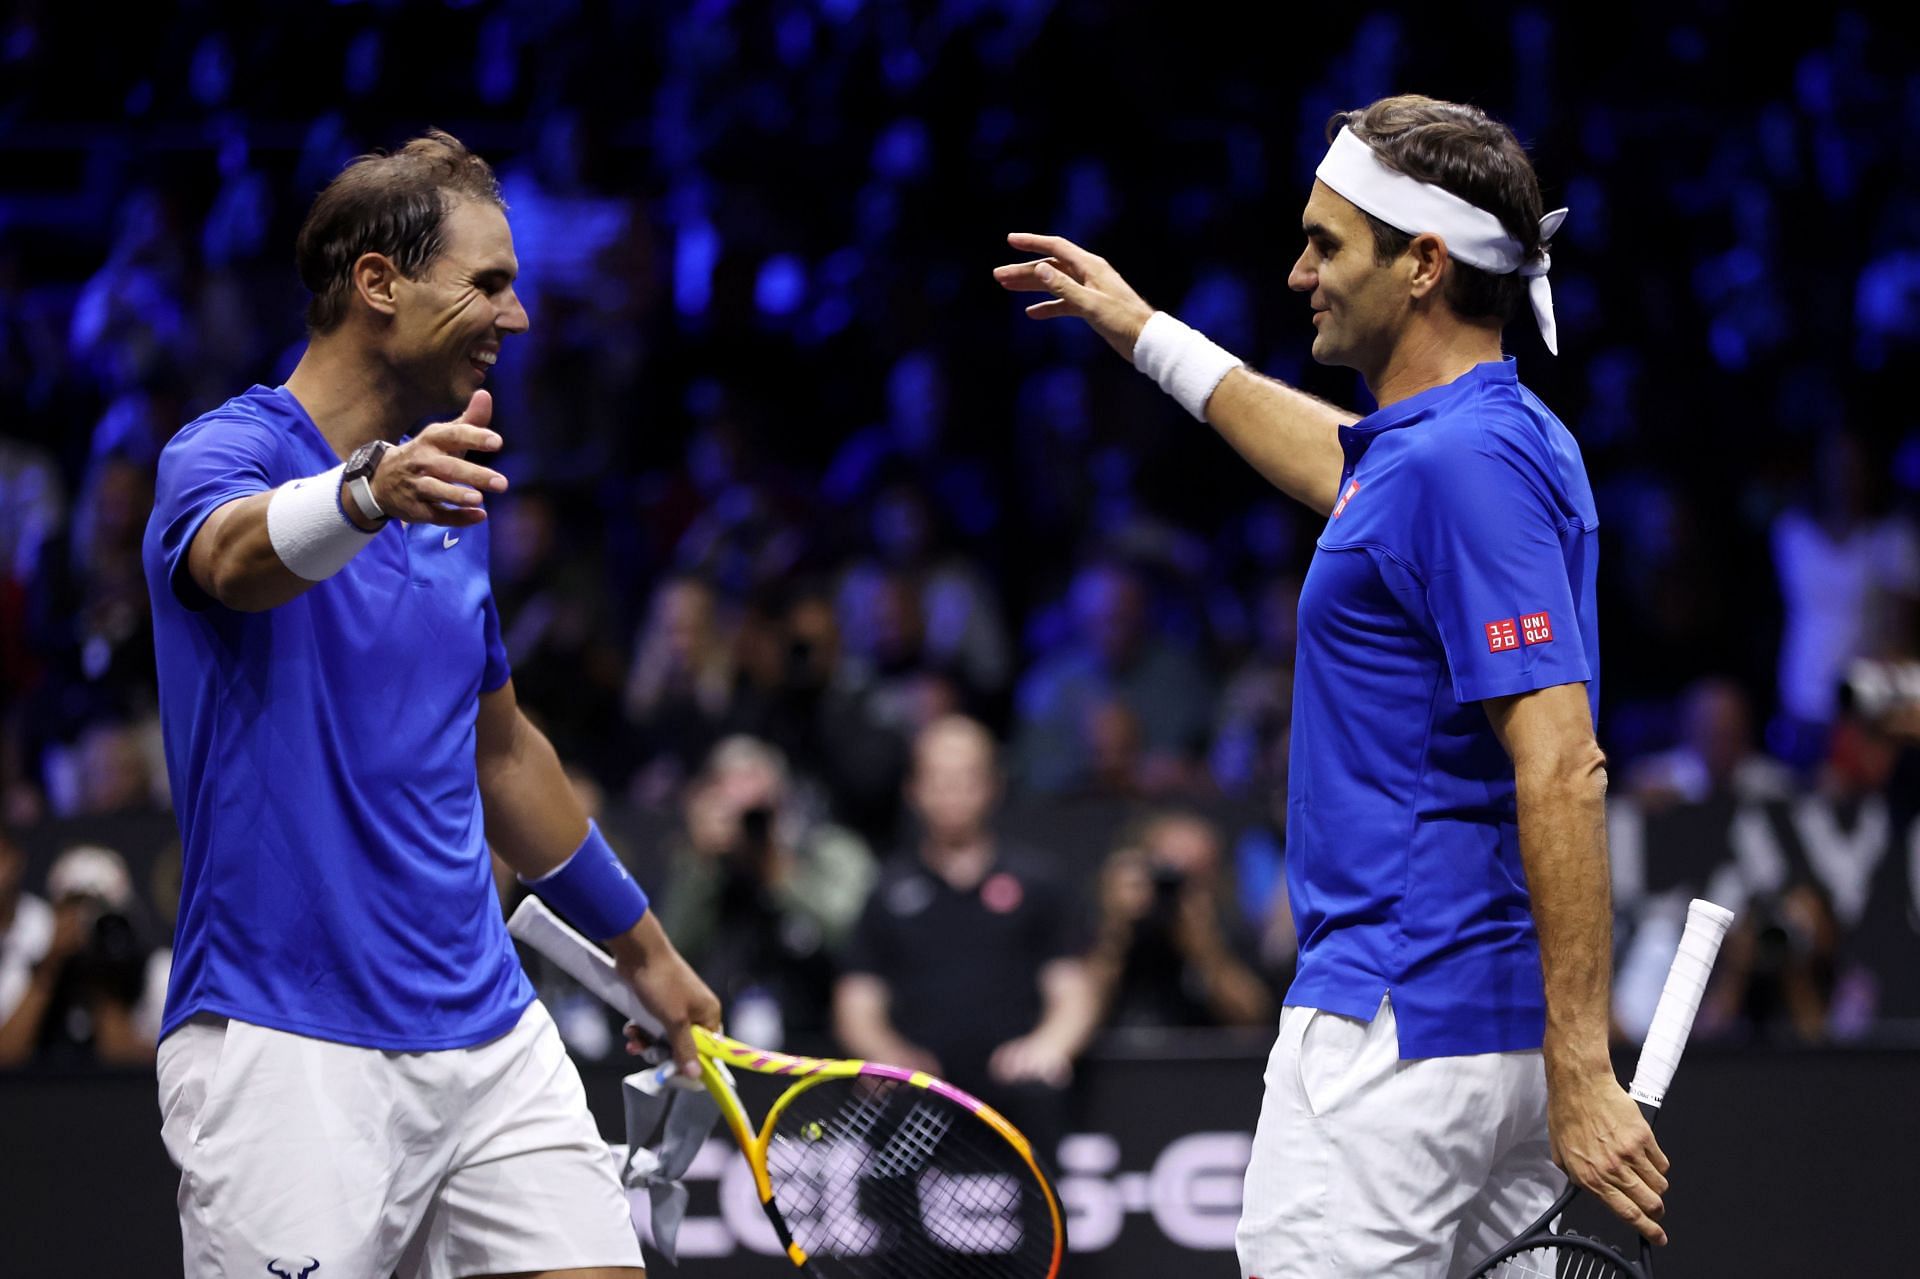 Rafael Nadal and Roger Federer during their doubles match at Laver Cup 2022